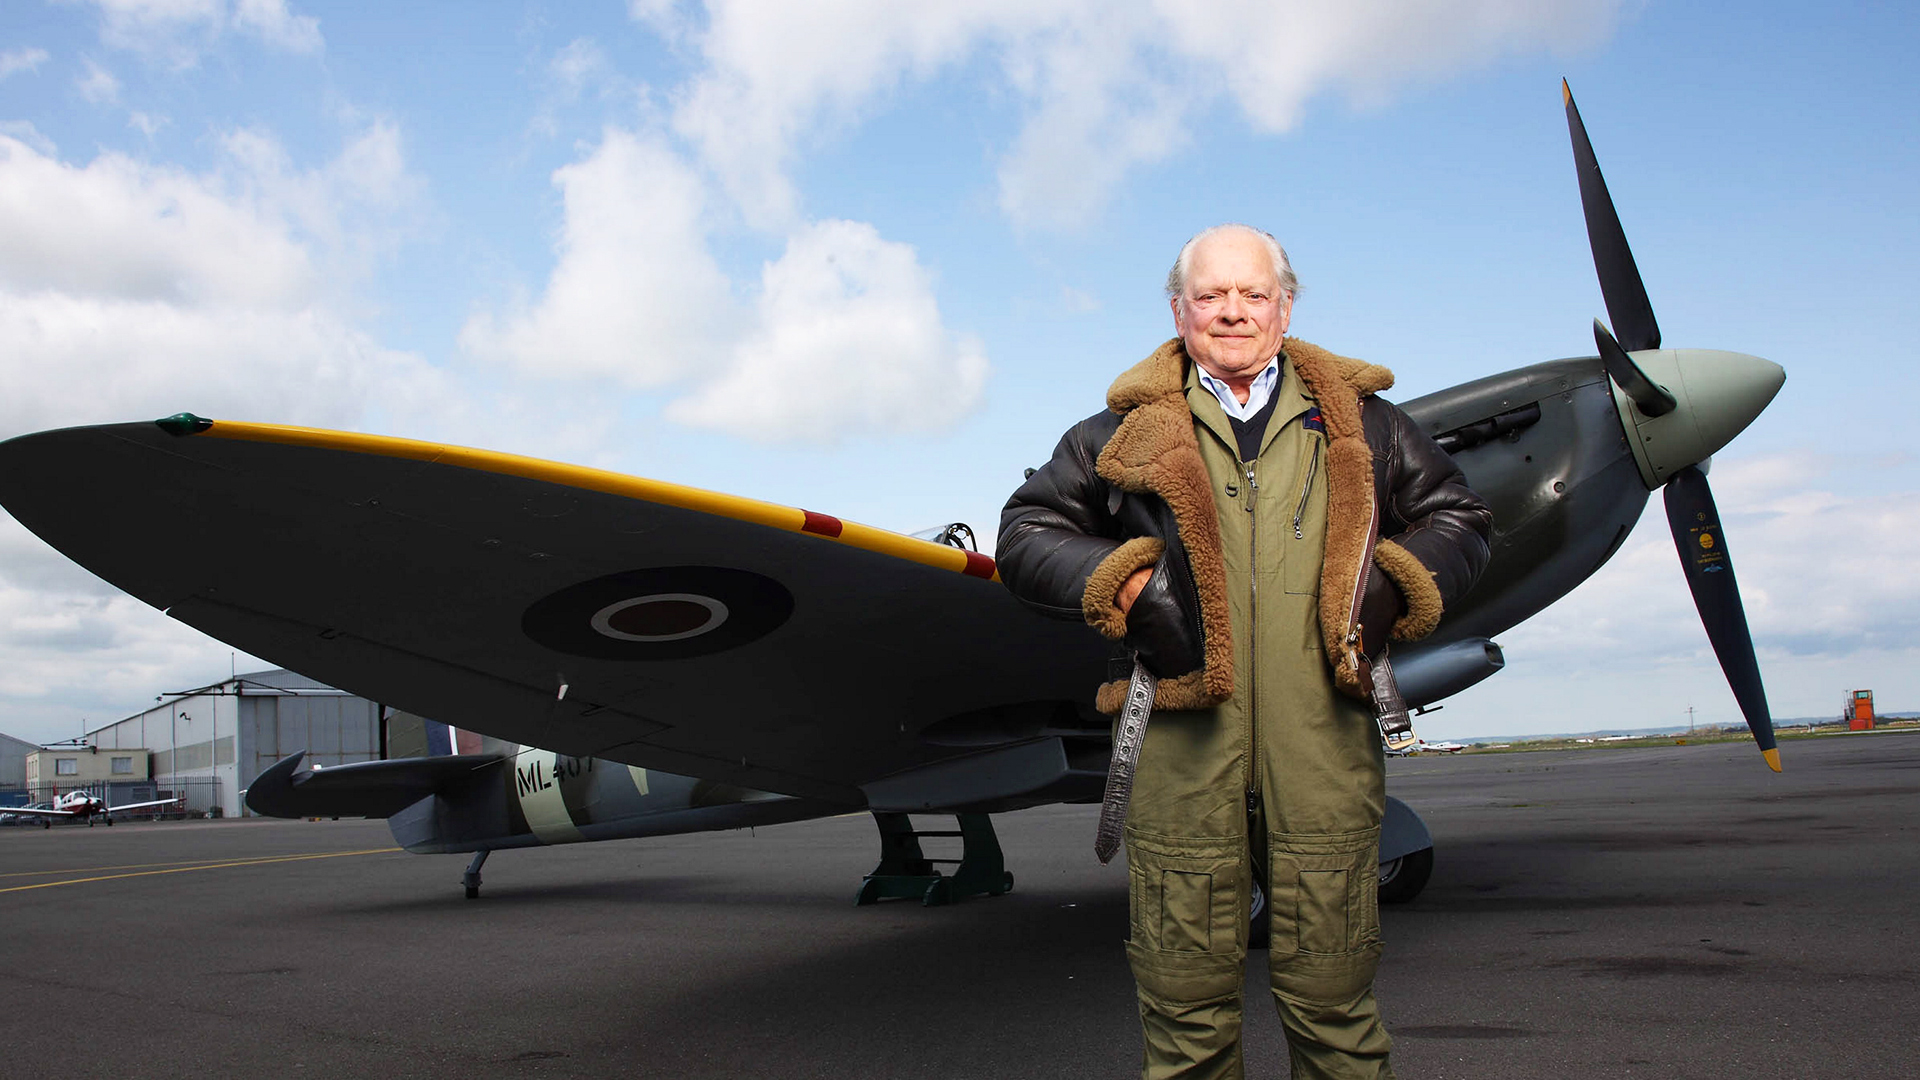 The Battle of Britain with David Jason